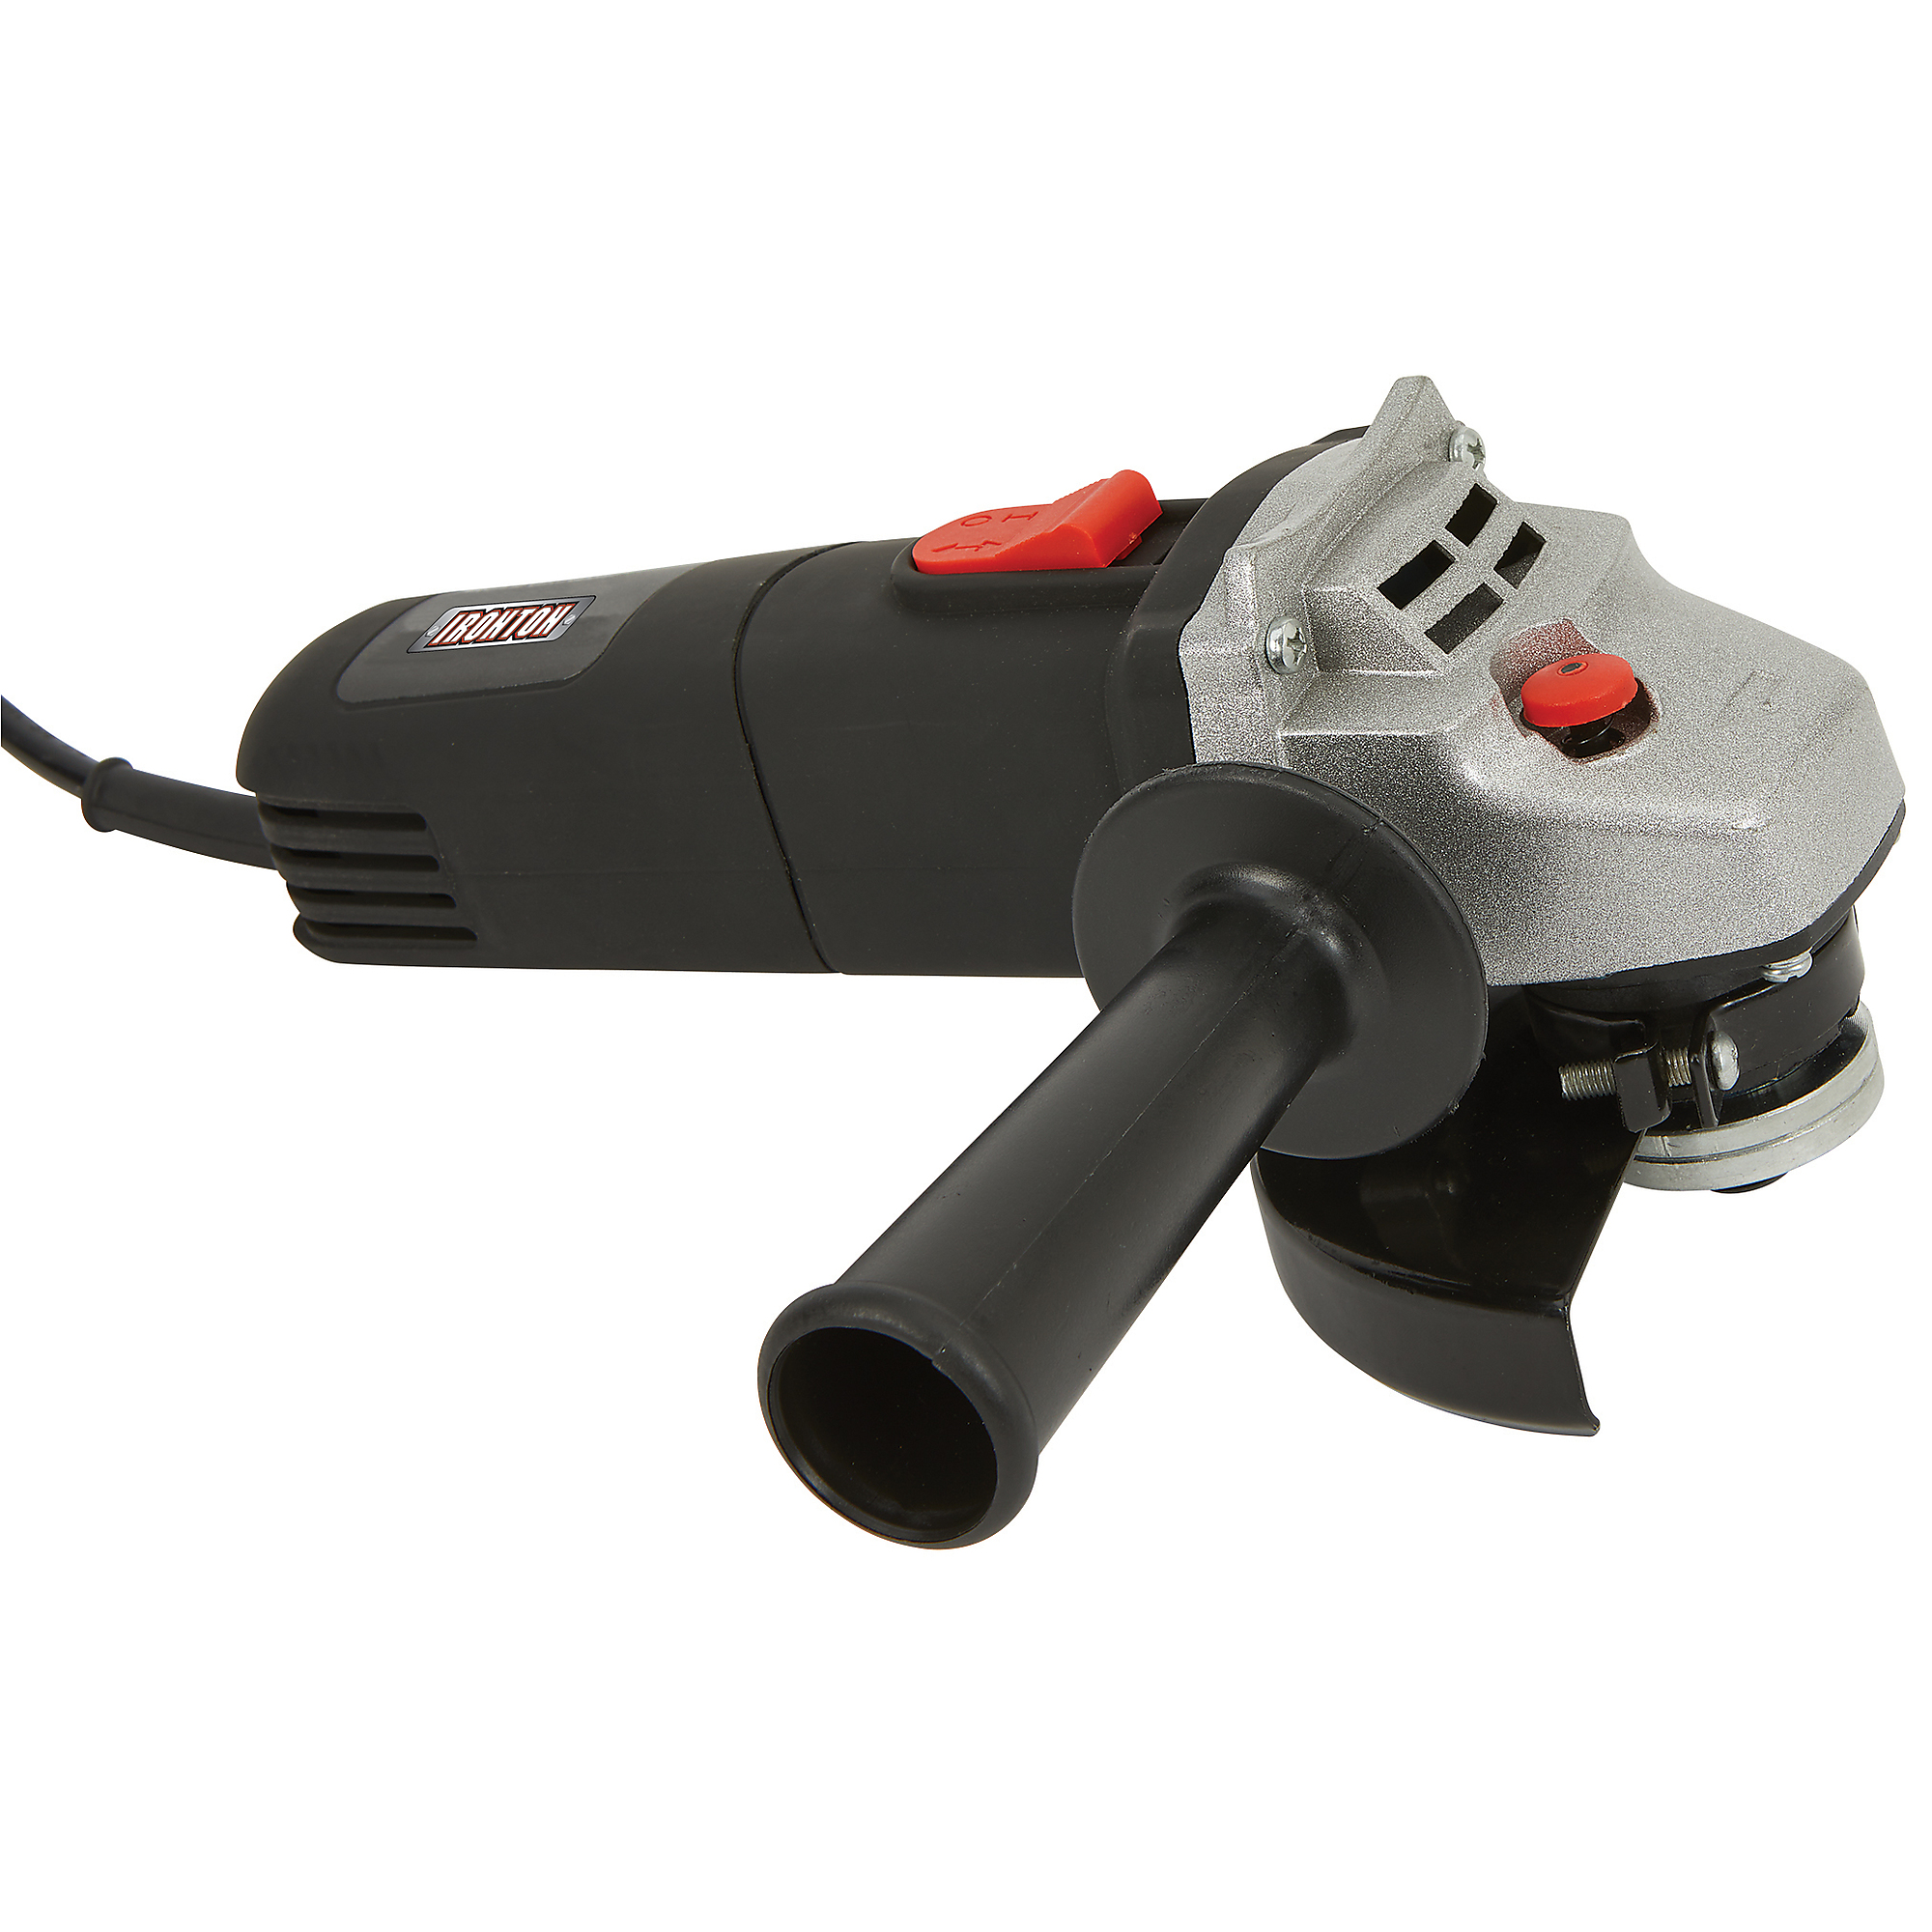 4.3 Amp, 4-1/2 in. Angle Grinder with Slide Switch